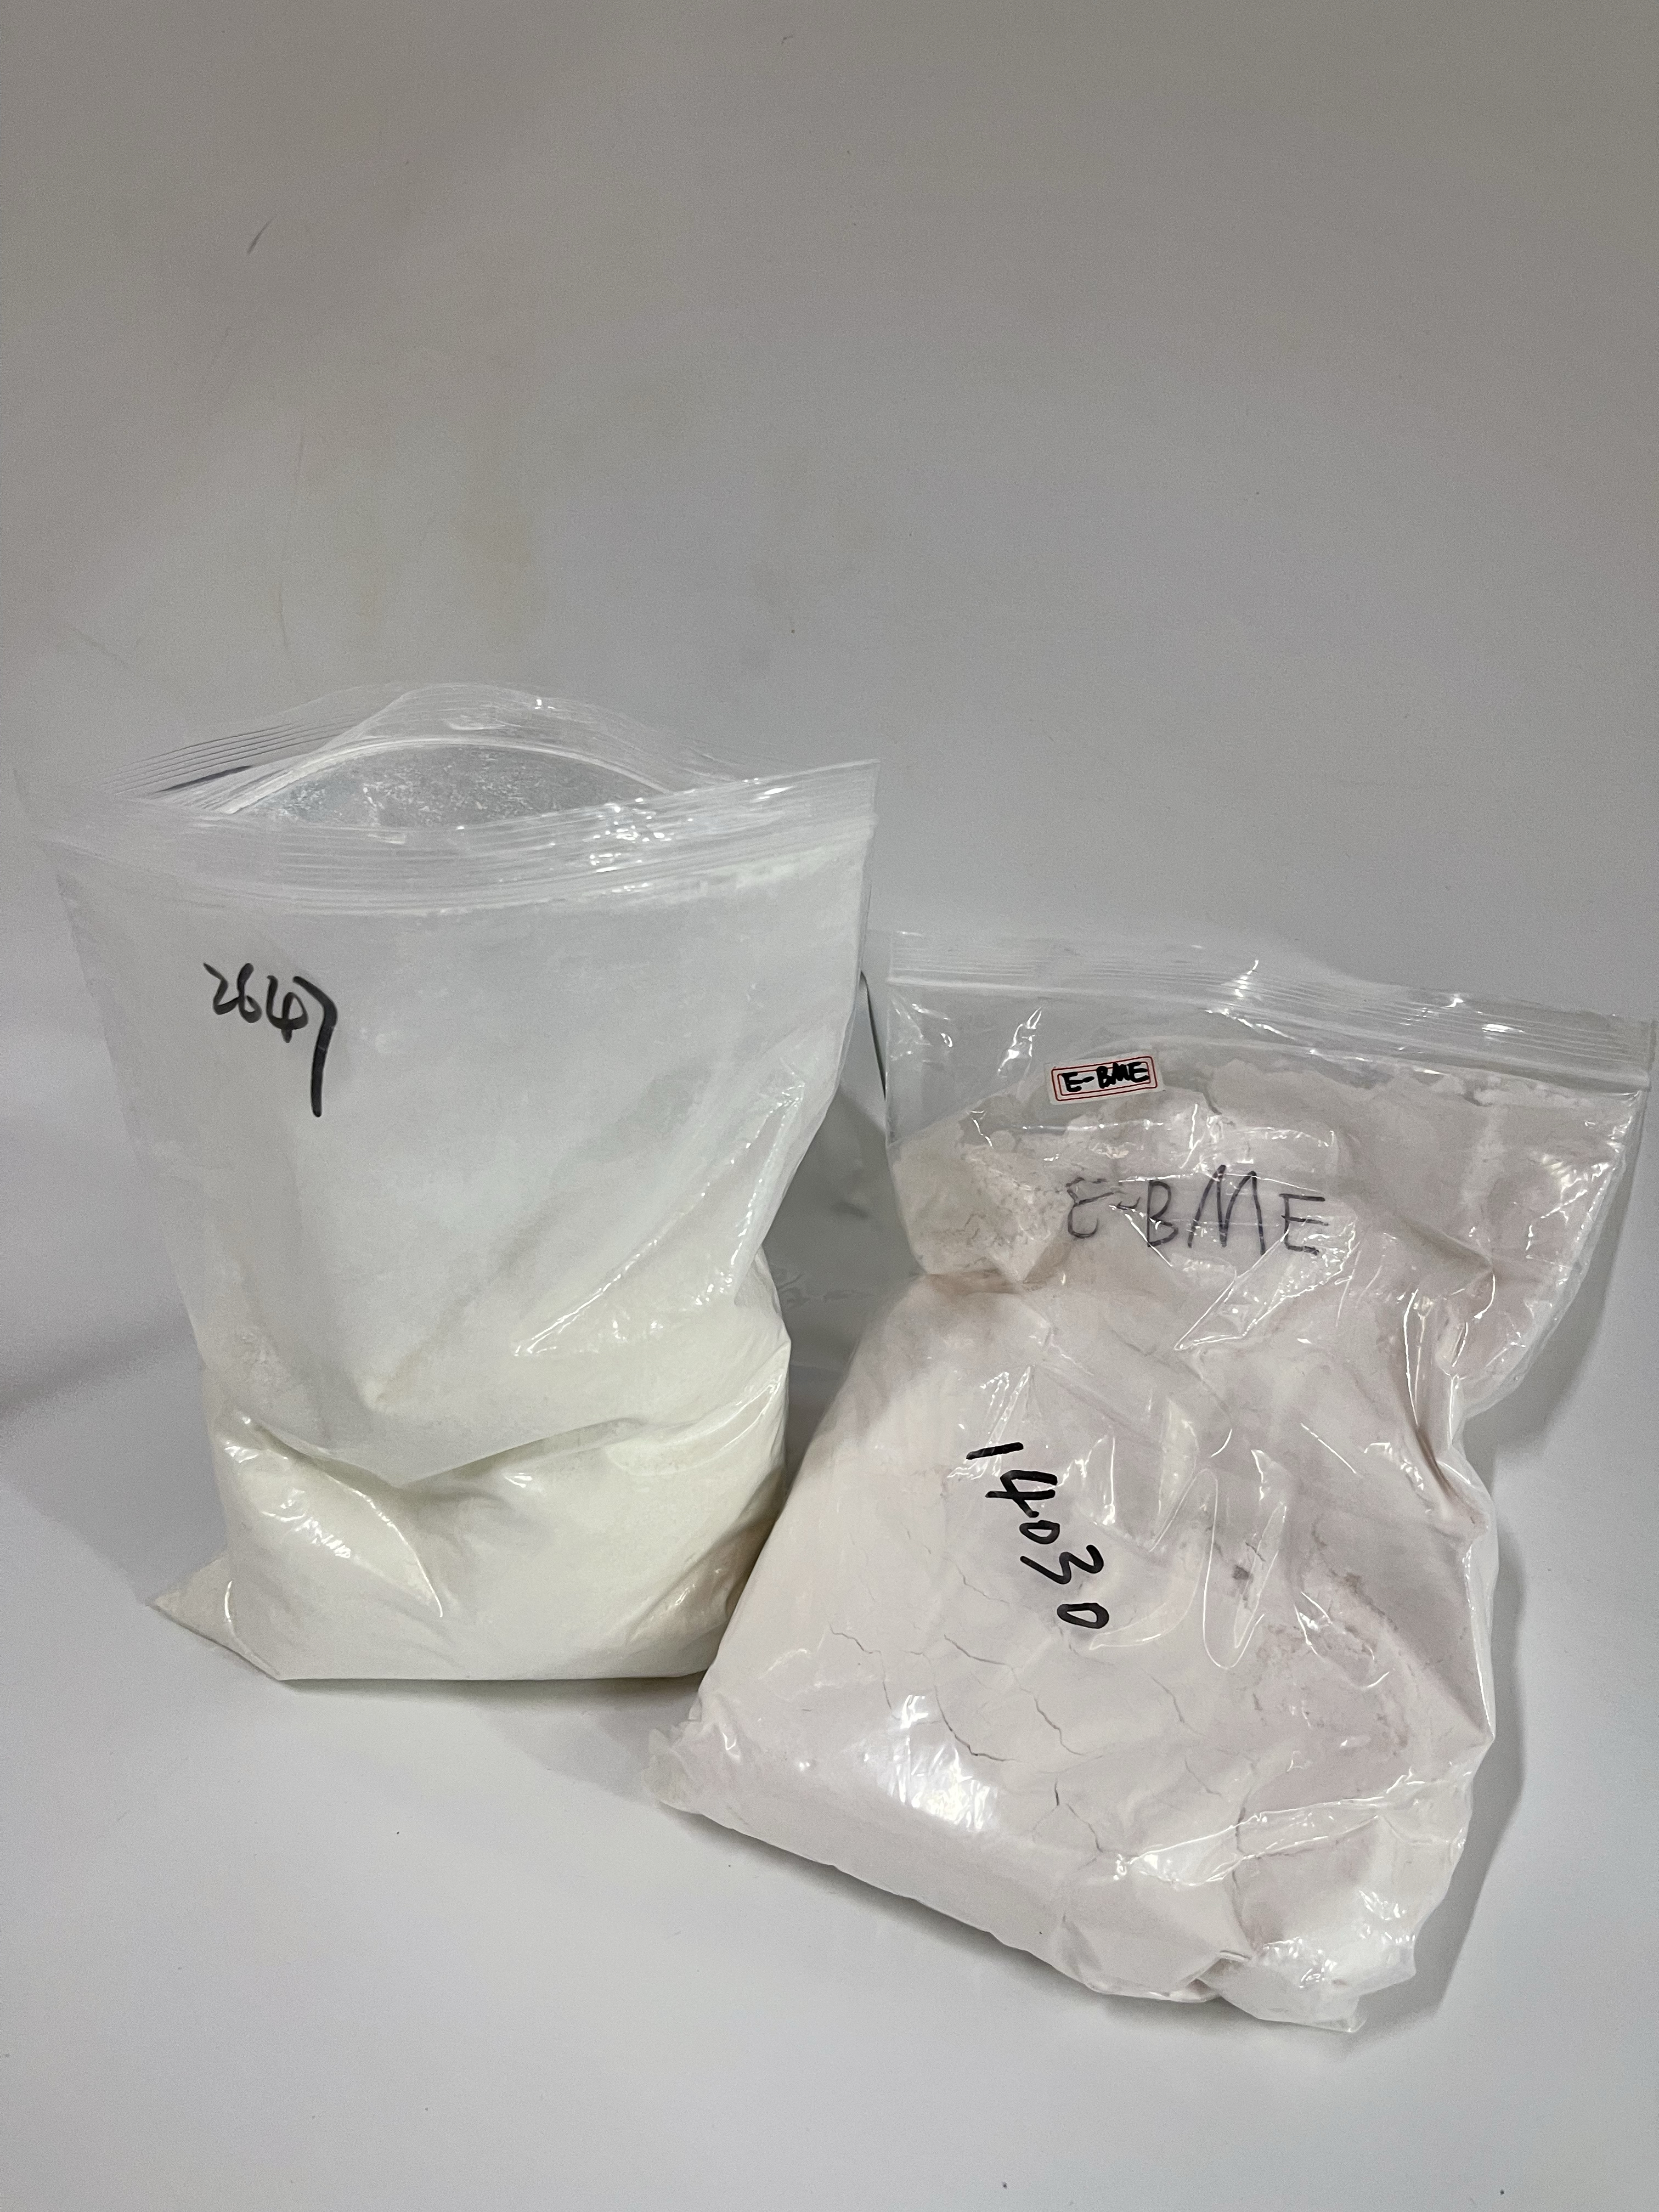 3 Kgs Lyrica powder and 1 Kg drugs caught on the airport - ARAB TIMES - KUWAIT NEWS